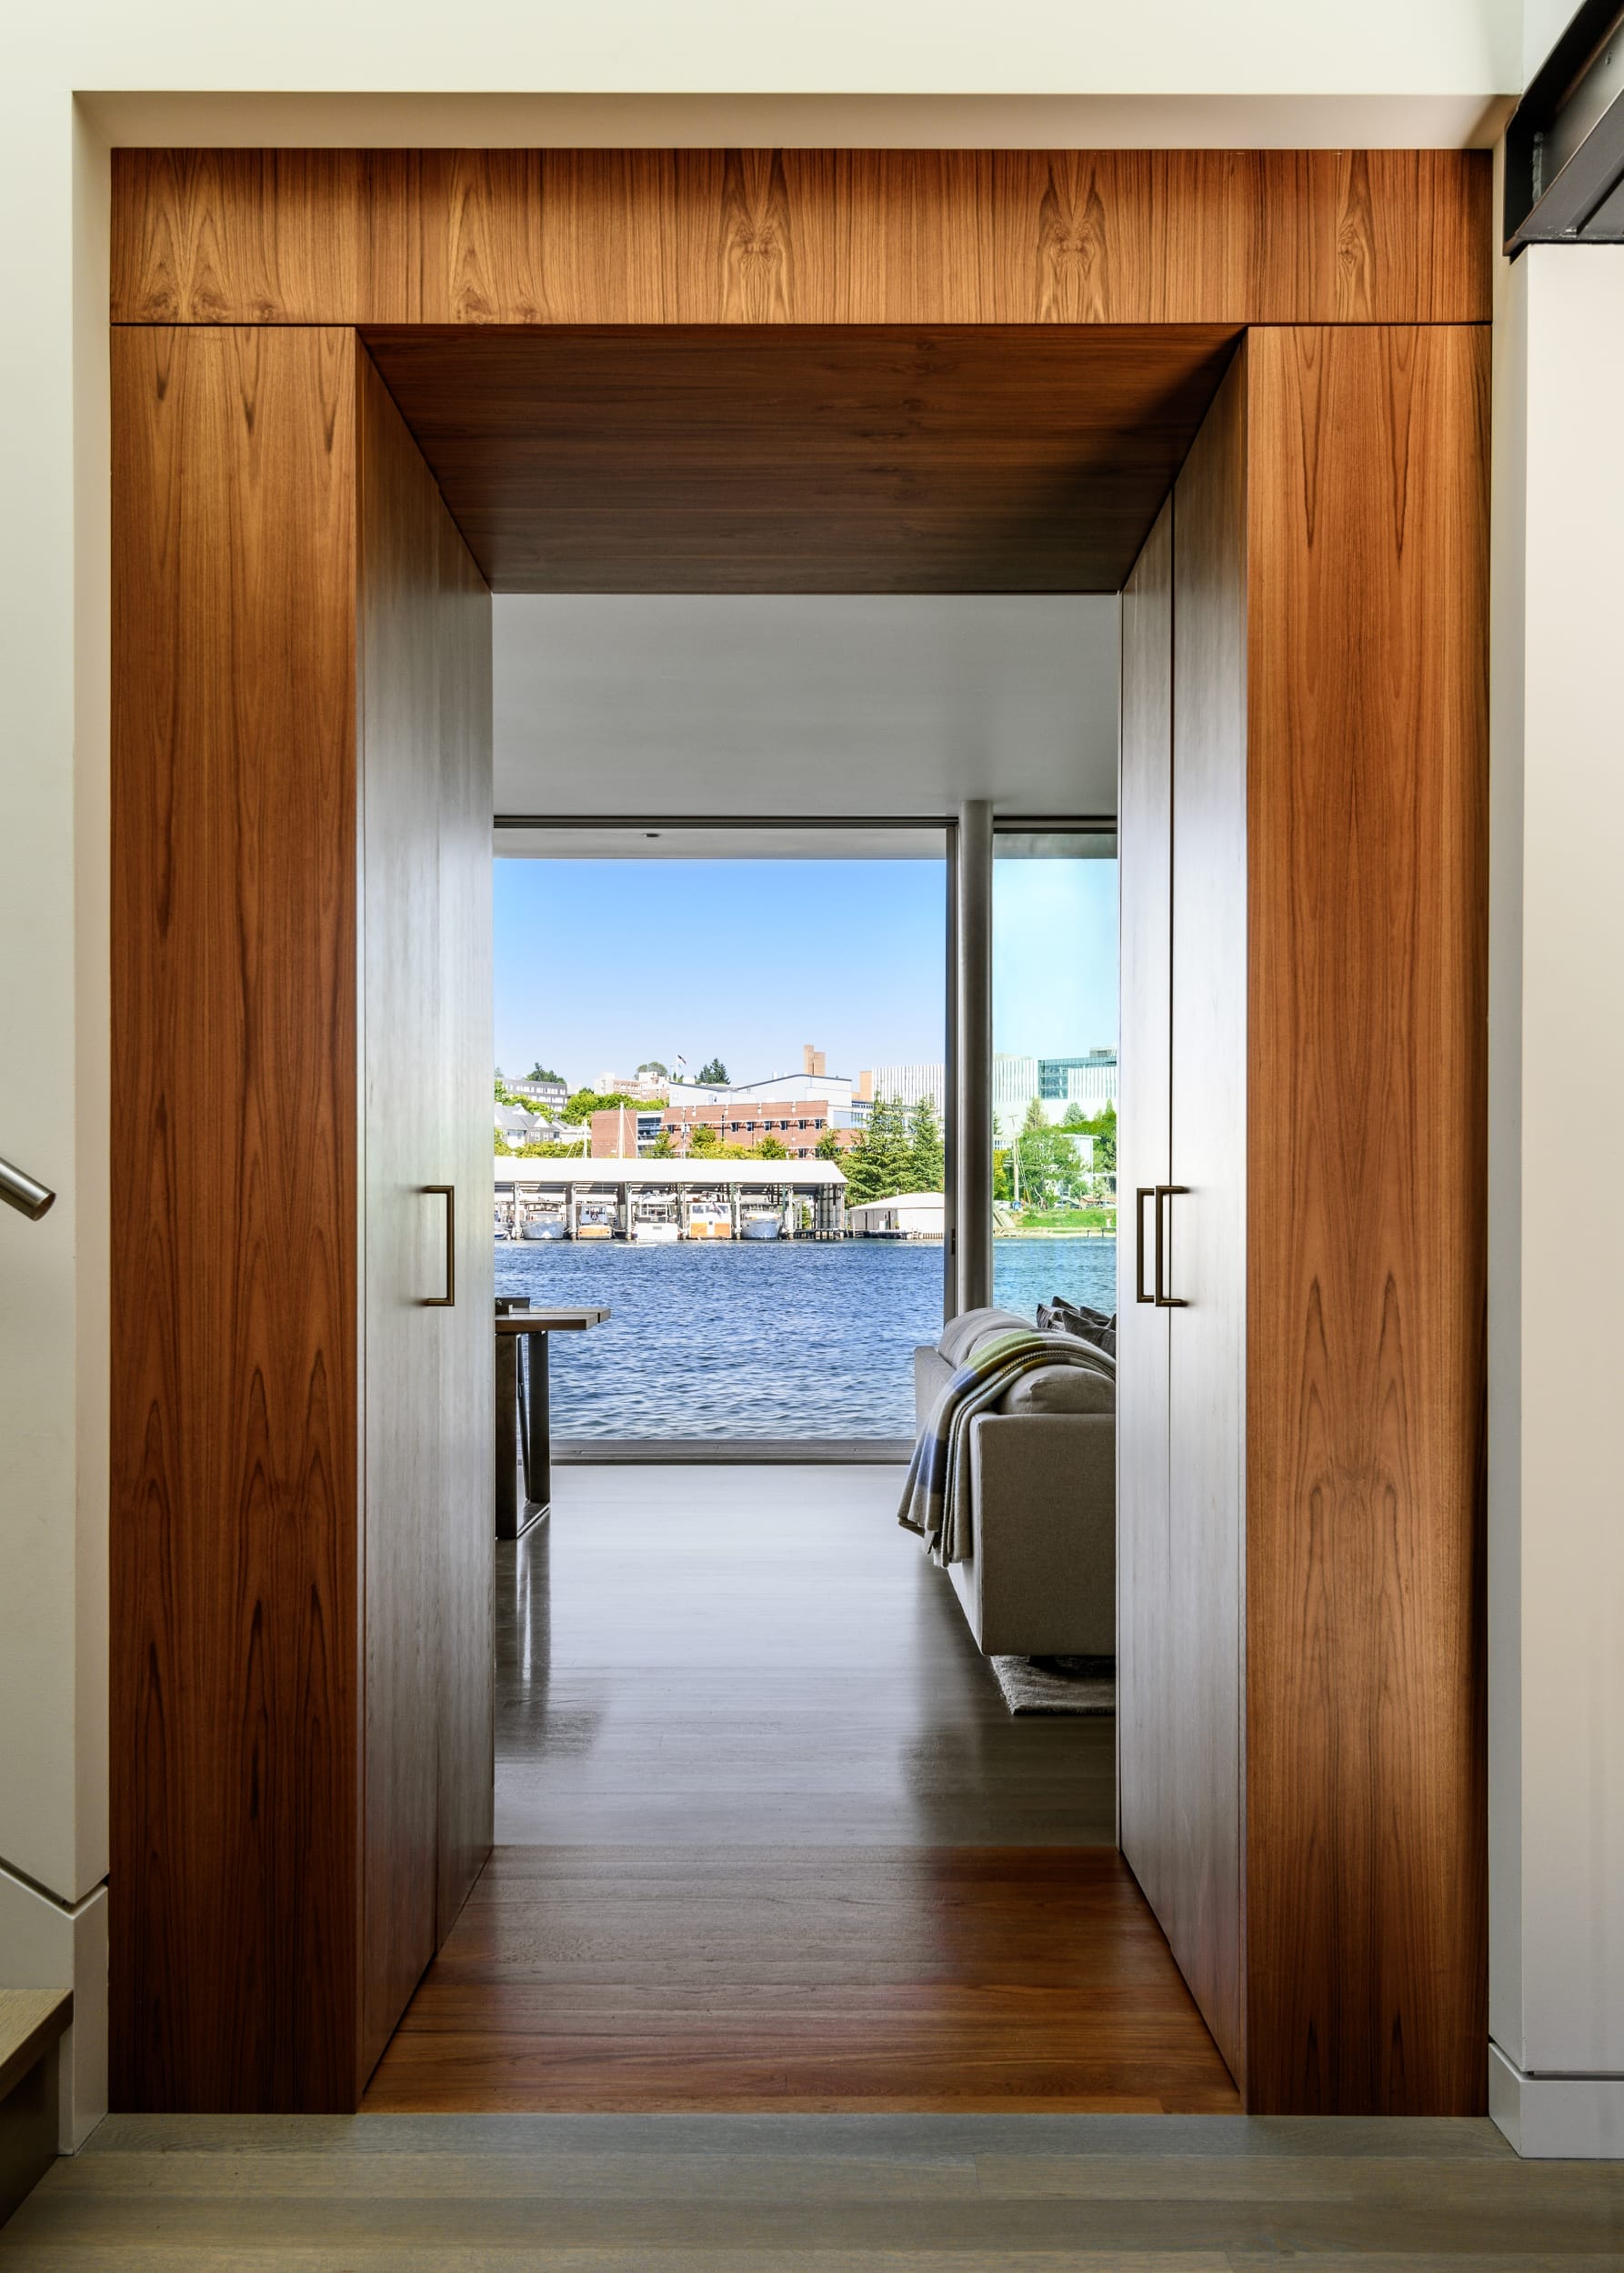 A wooden door leading to a room with a view of the water.